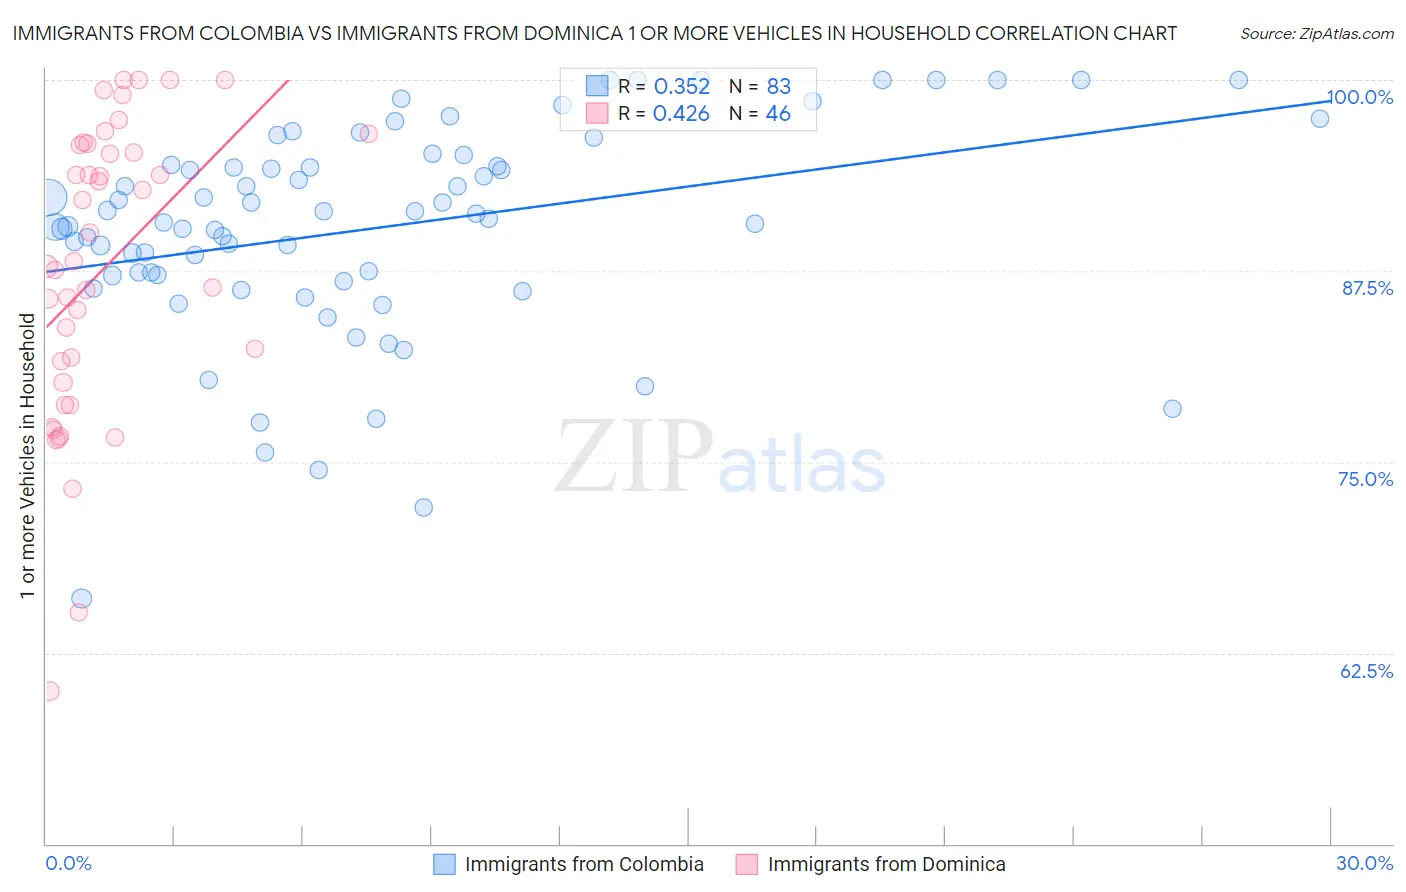 Immigrants from Colombia vs Immigrants from Dominica 1 or more Vehicles in Household